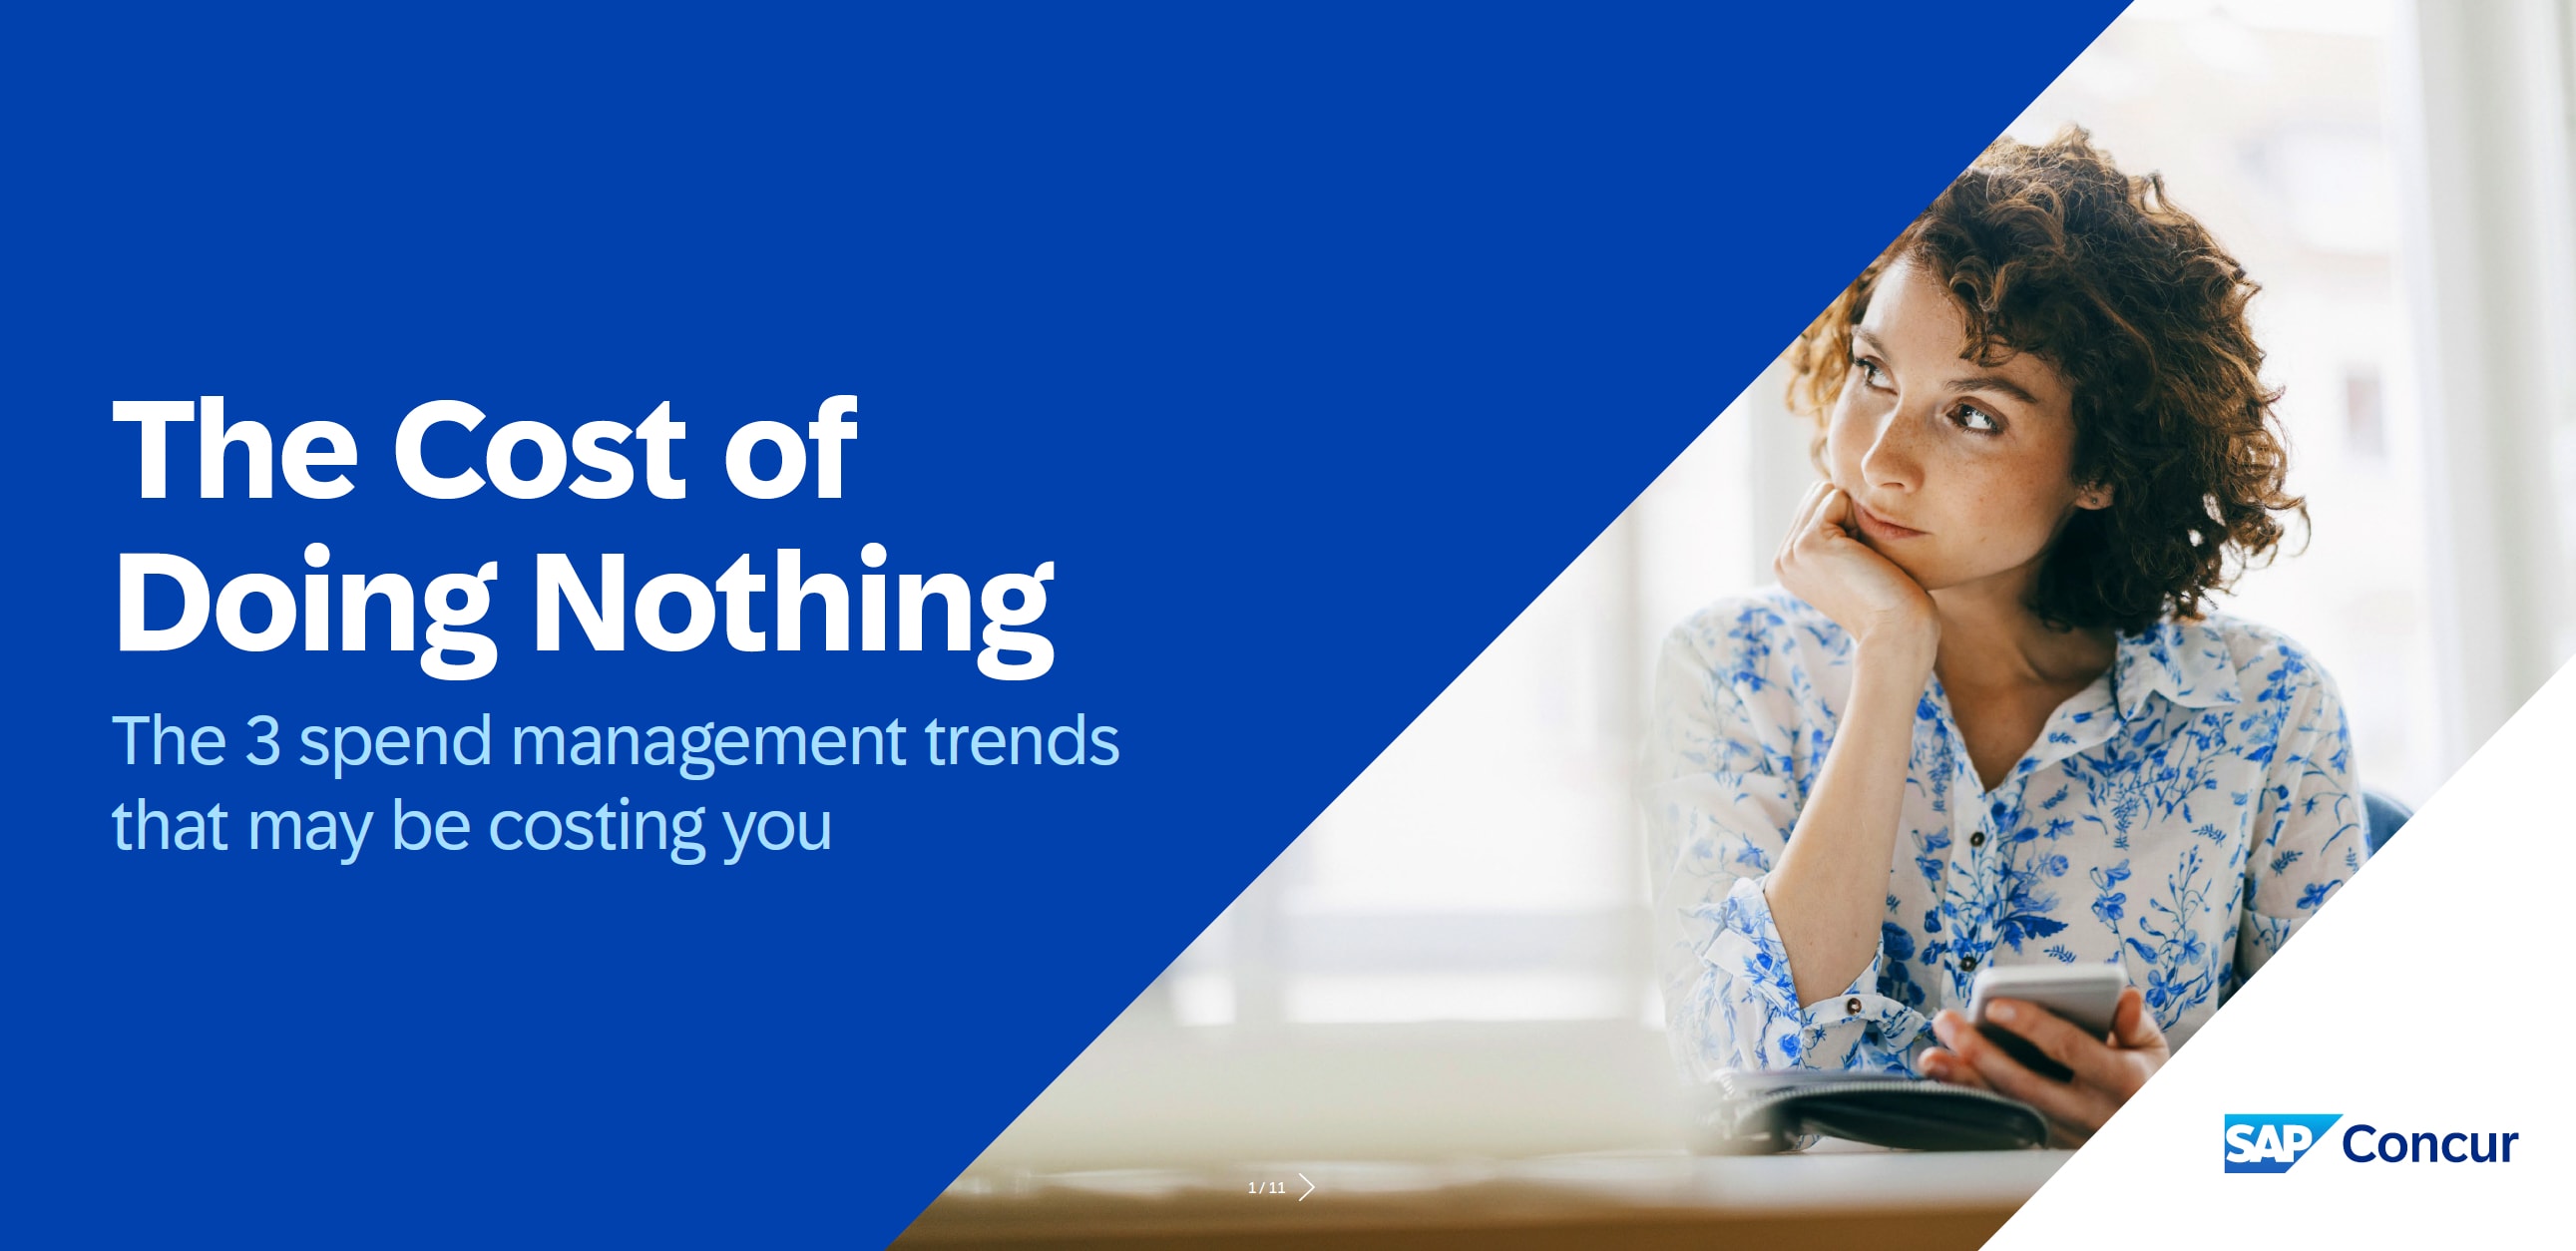 3 spend management trends that may be costing you